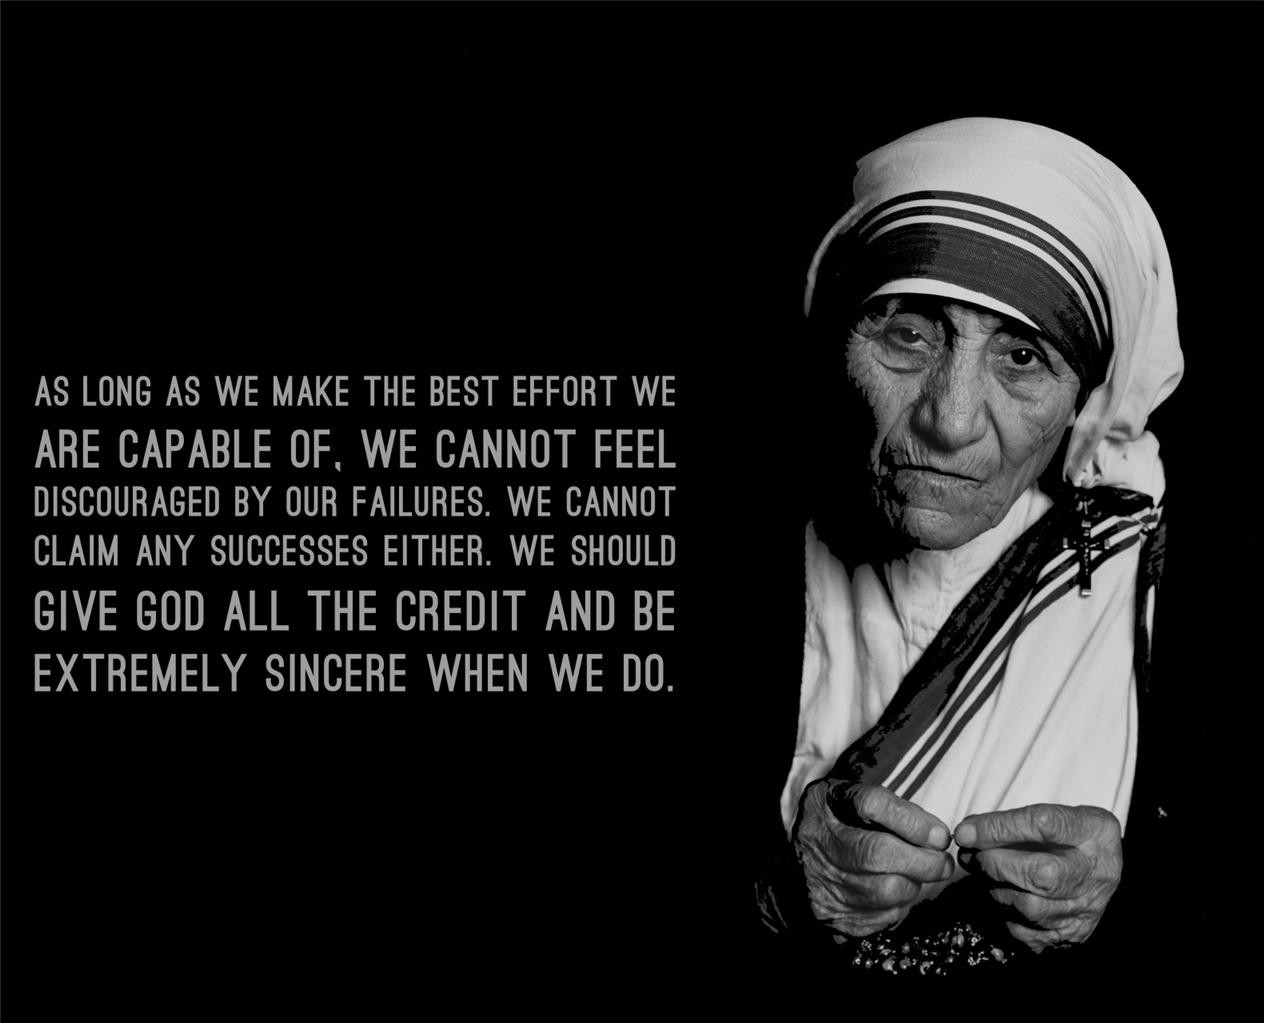 Mother Teresa Quotes On Service
 Mother Teresa Quotes Serving QuotesGram